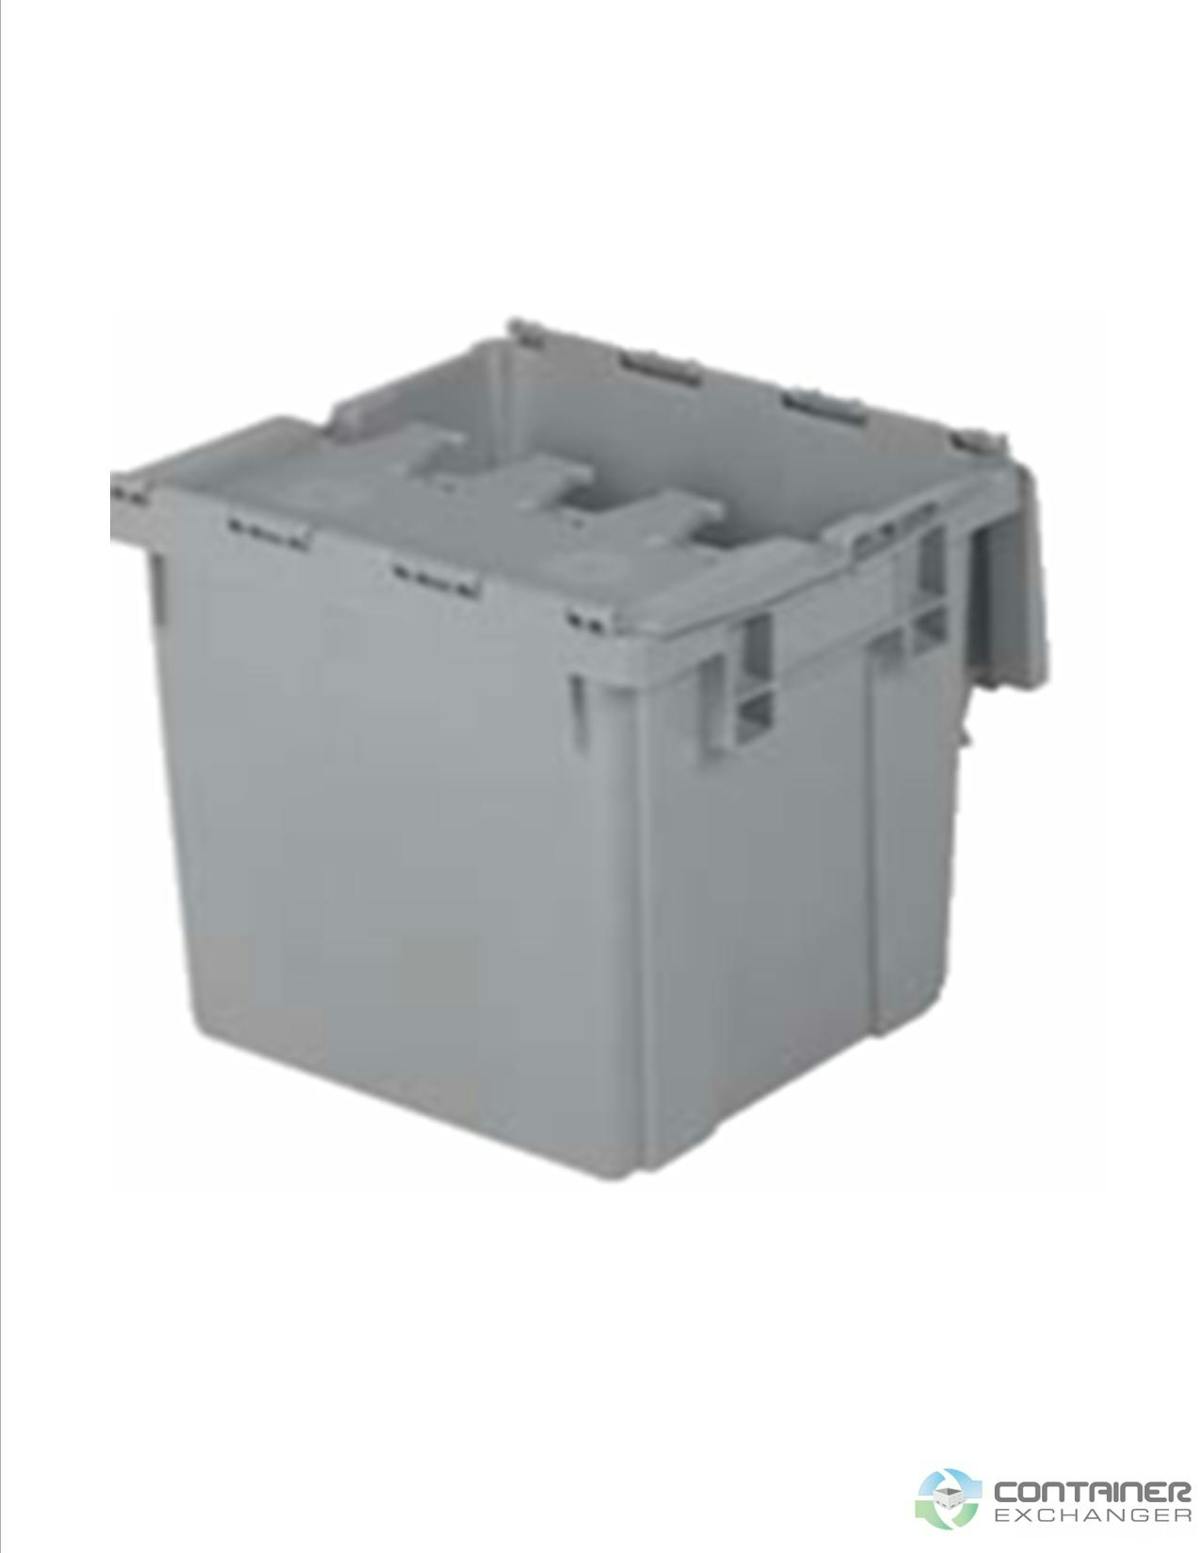 Stack & Nest Totes For Sale: NEW 15x14x13 Stack & Nest Tote- Attached Lid In Ontario - image 1